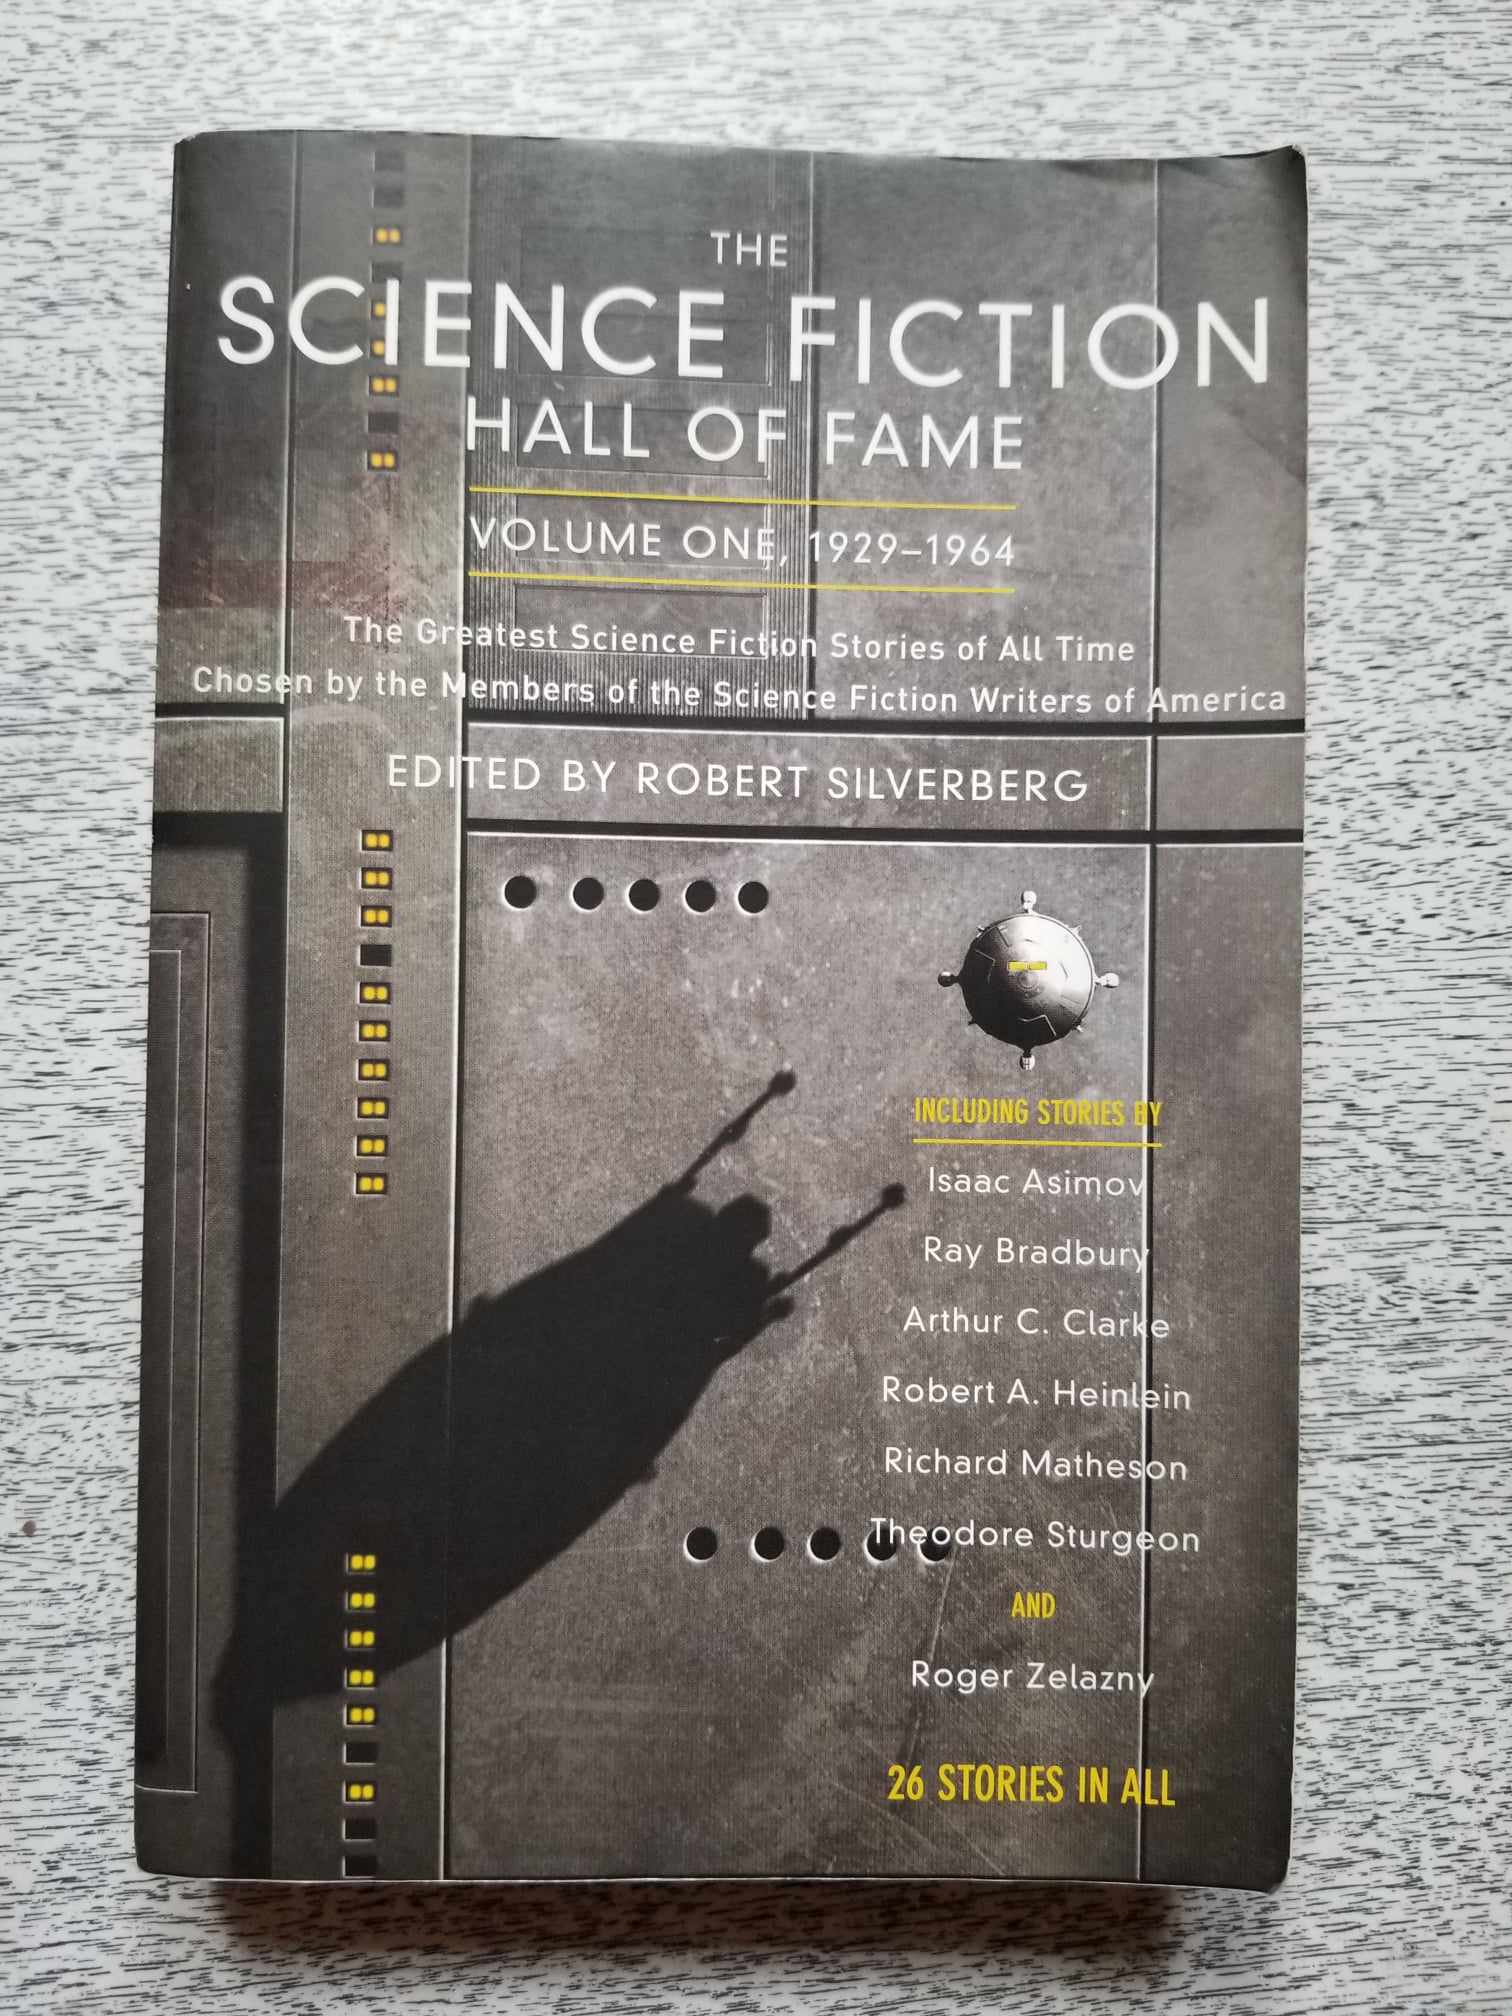 The Science Fiction Hall of Fame Volume 1